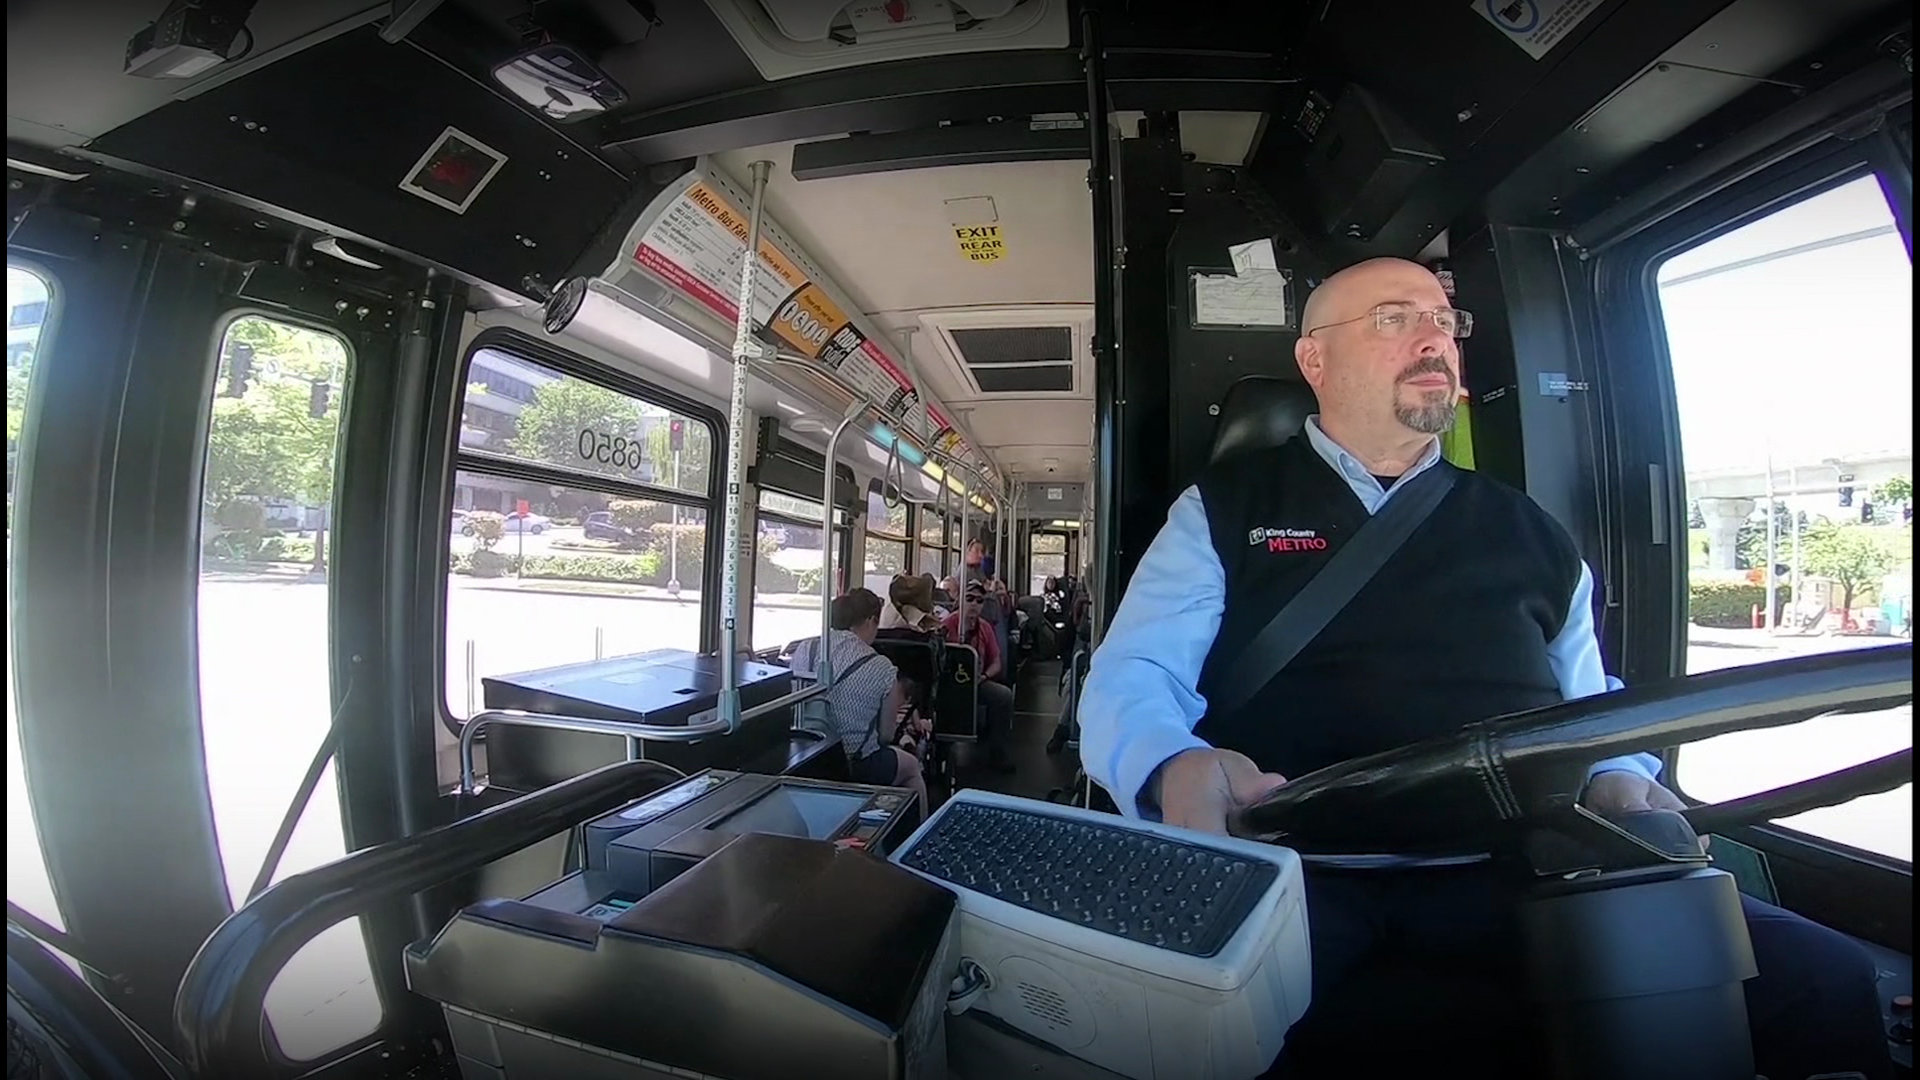 Bus driver Eric Stark saved himself and his passengers when a gunman opened fire on the Route 75 on a routine, sunny, Wednesday.